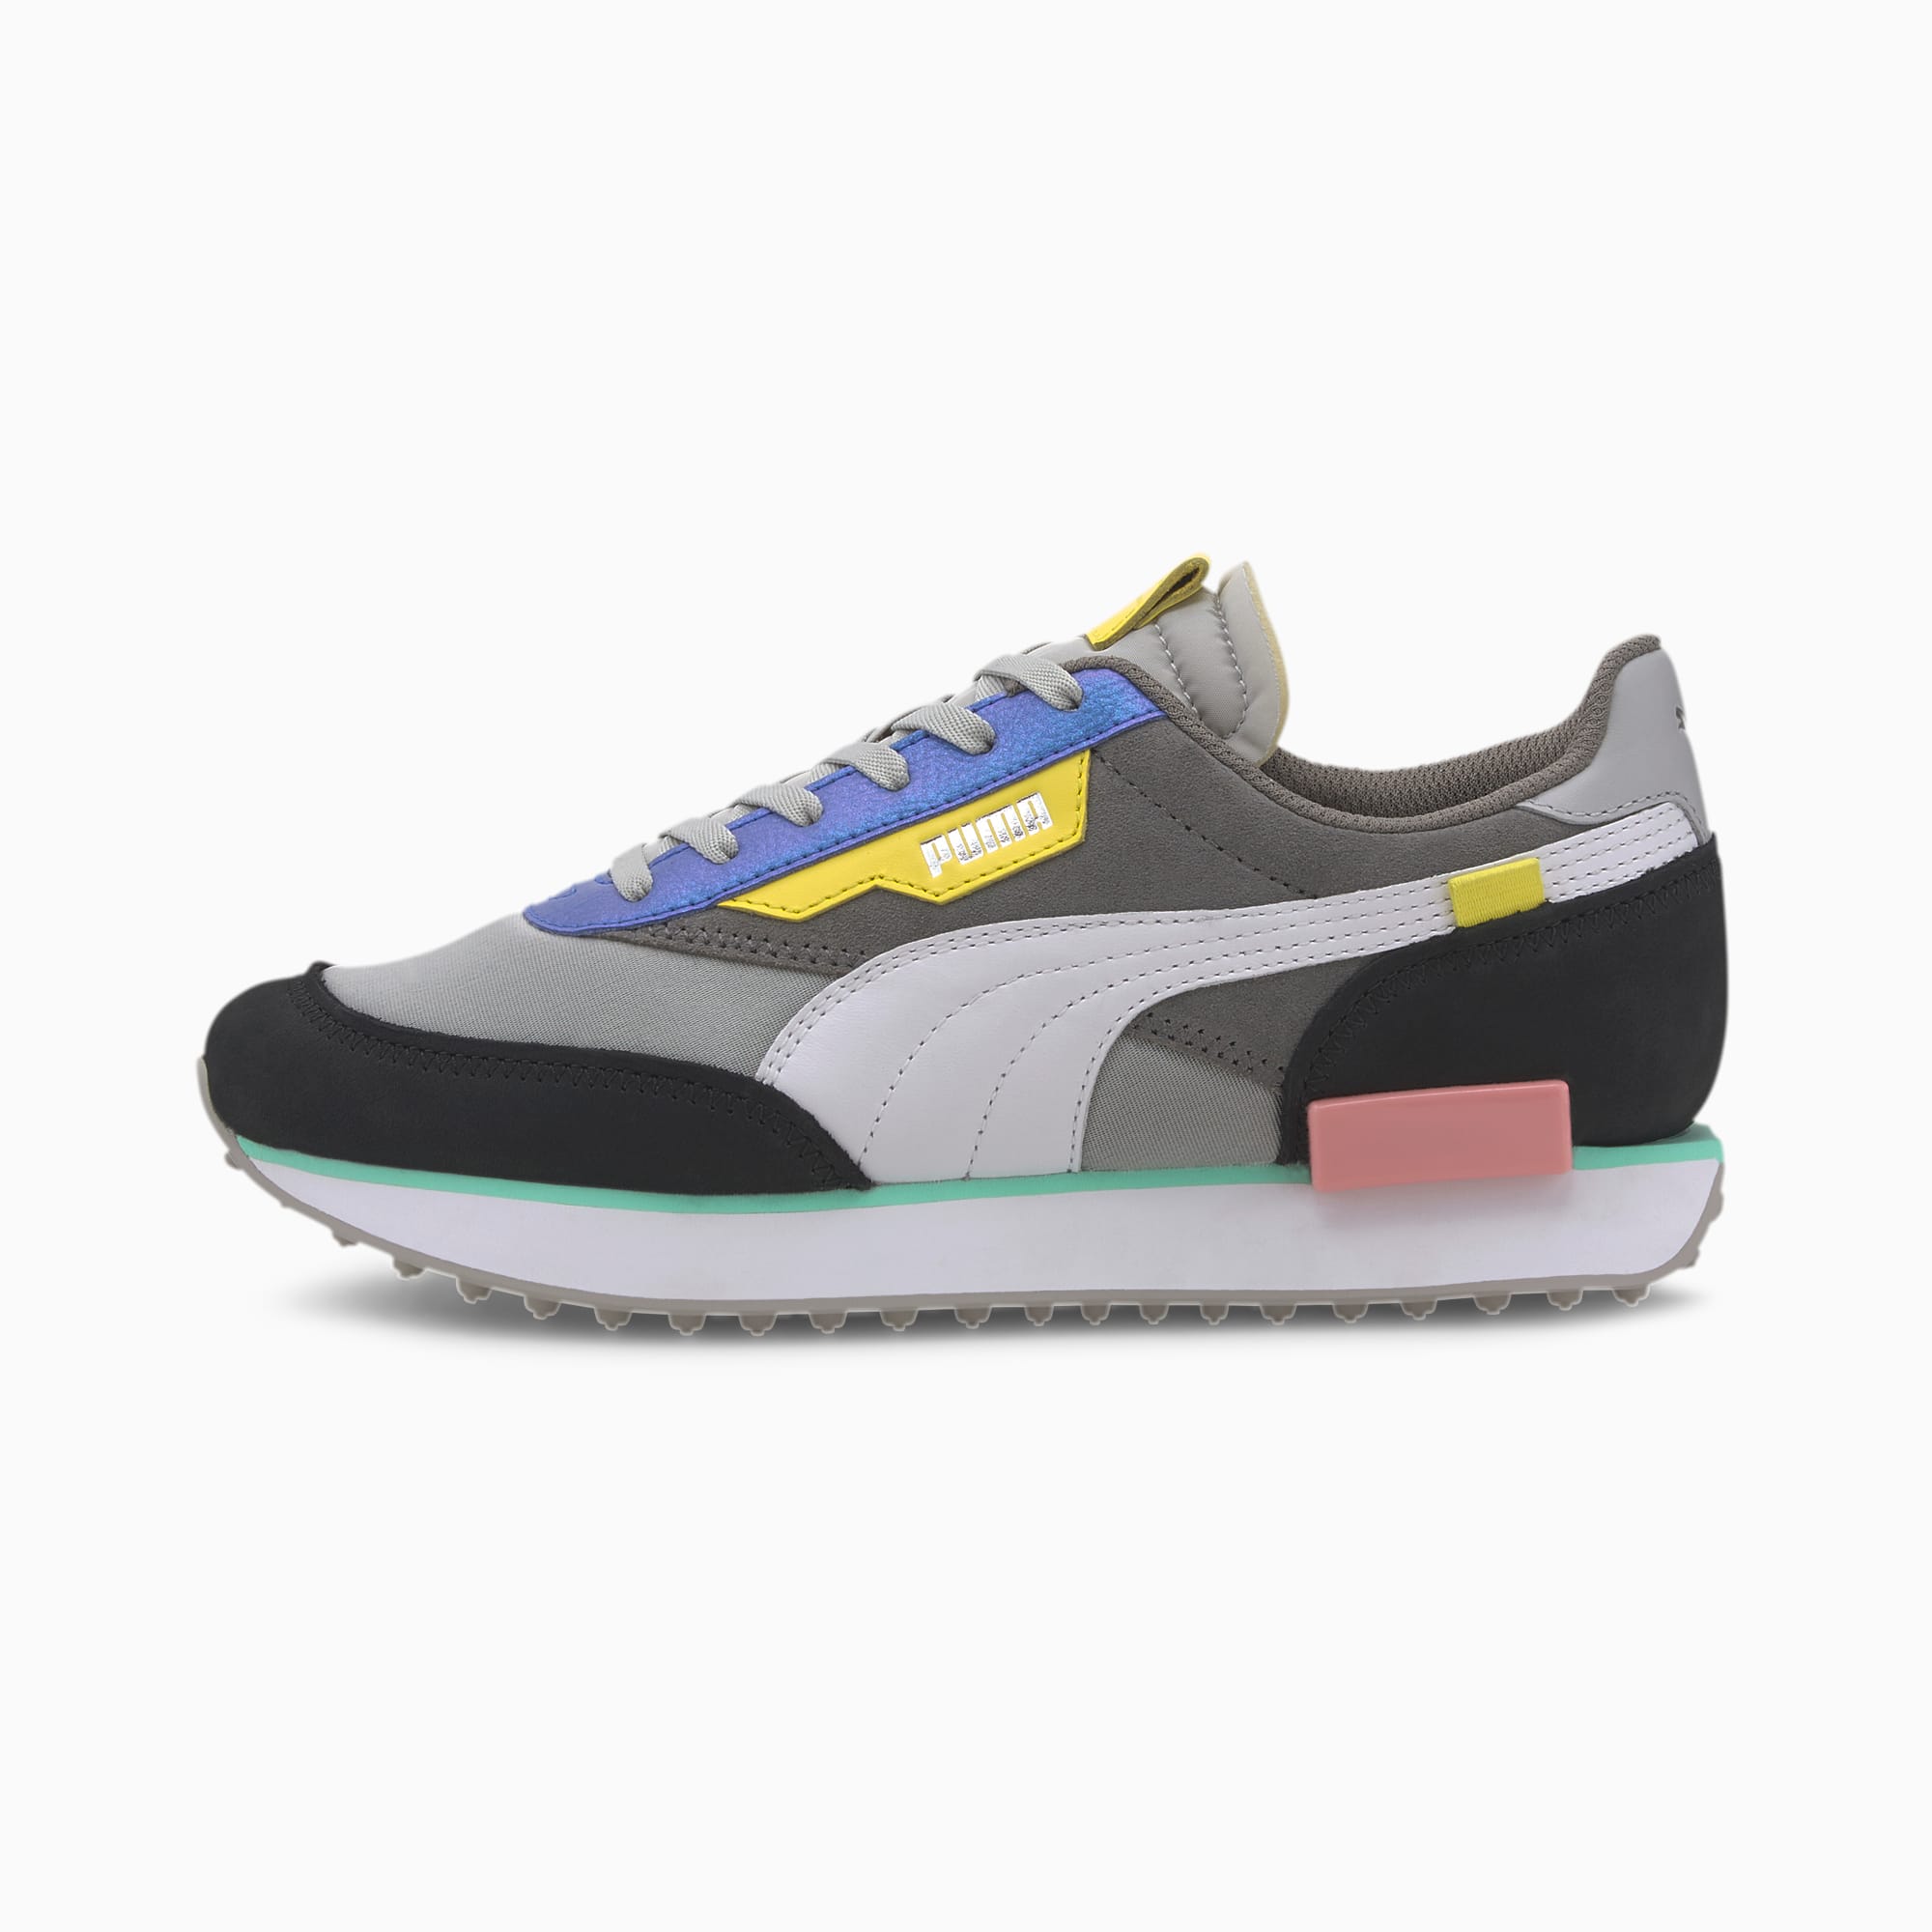 Future Rider Royale Women's Sneakers 